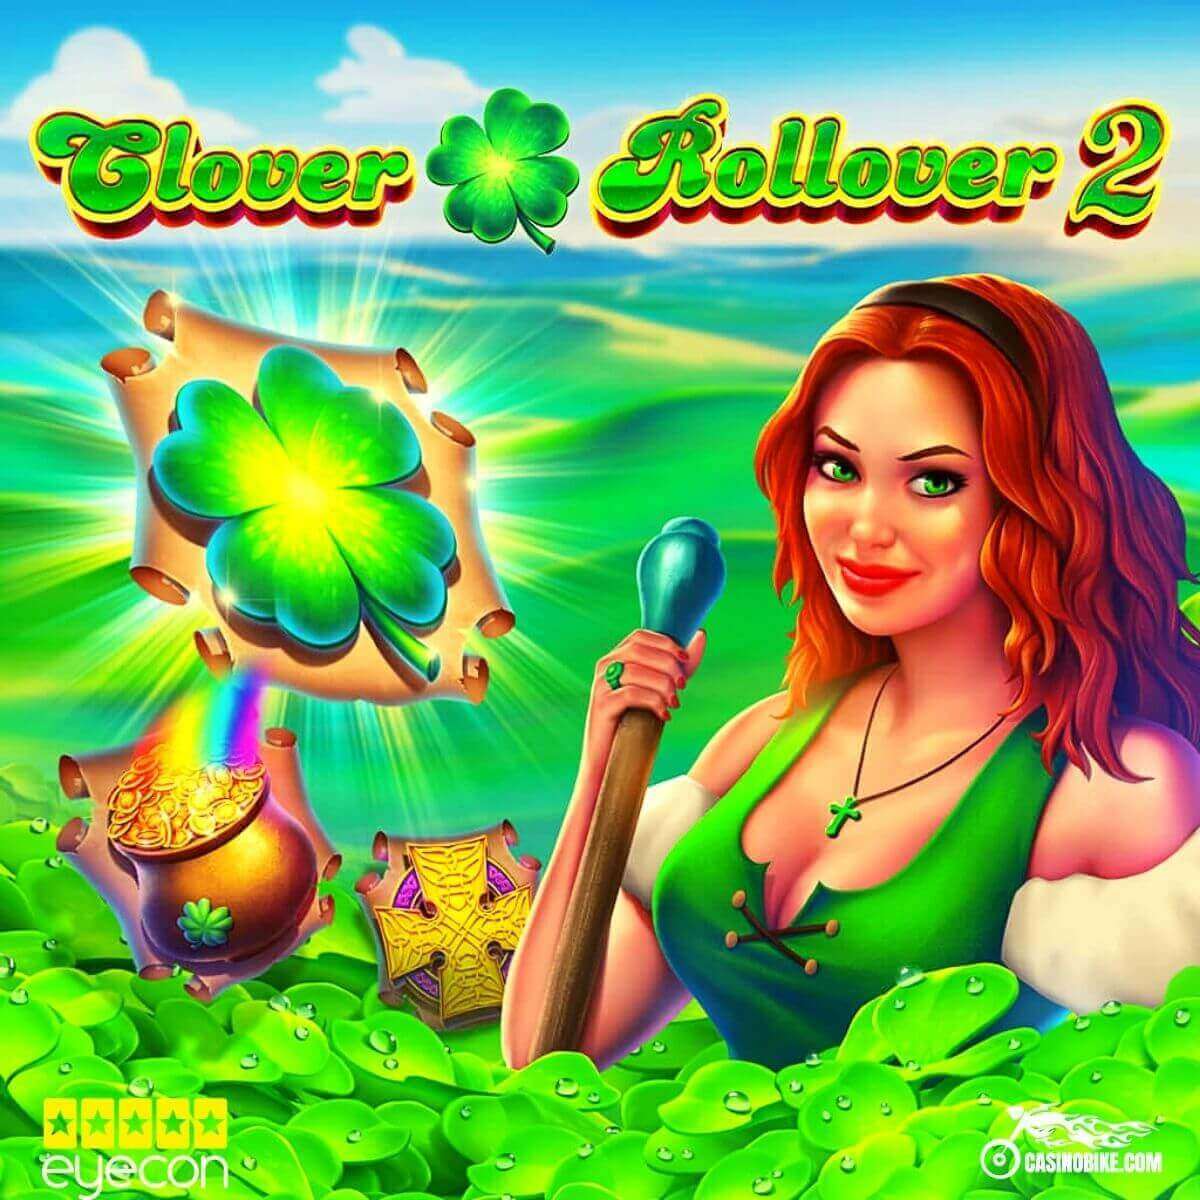 Clover Rollover 2 Slot by Eyecon Gaming